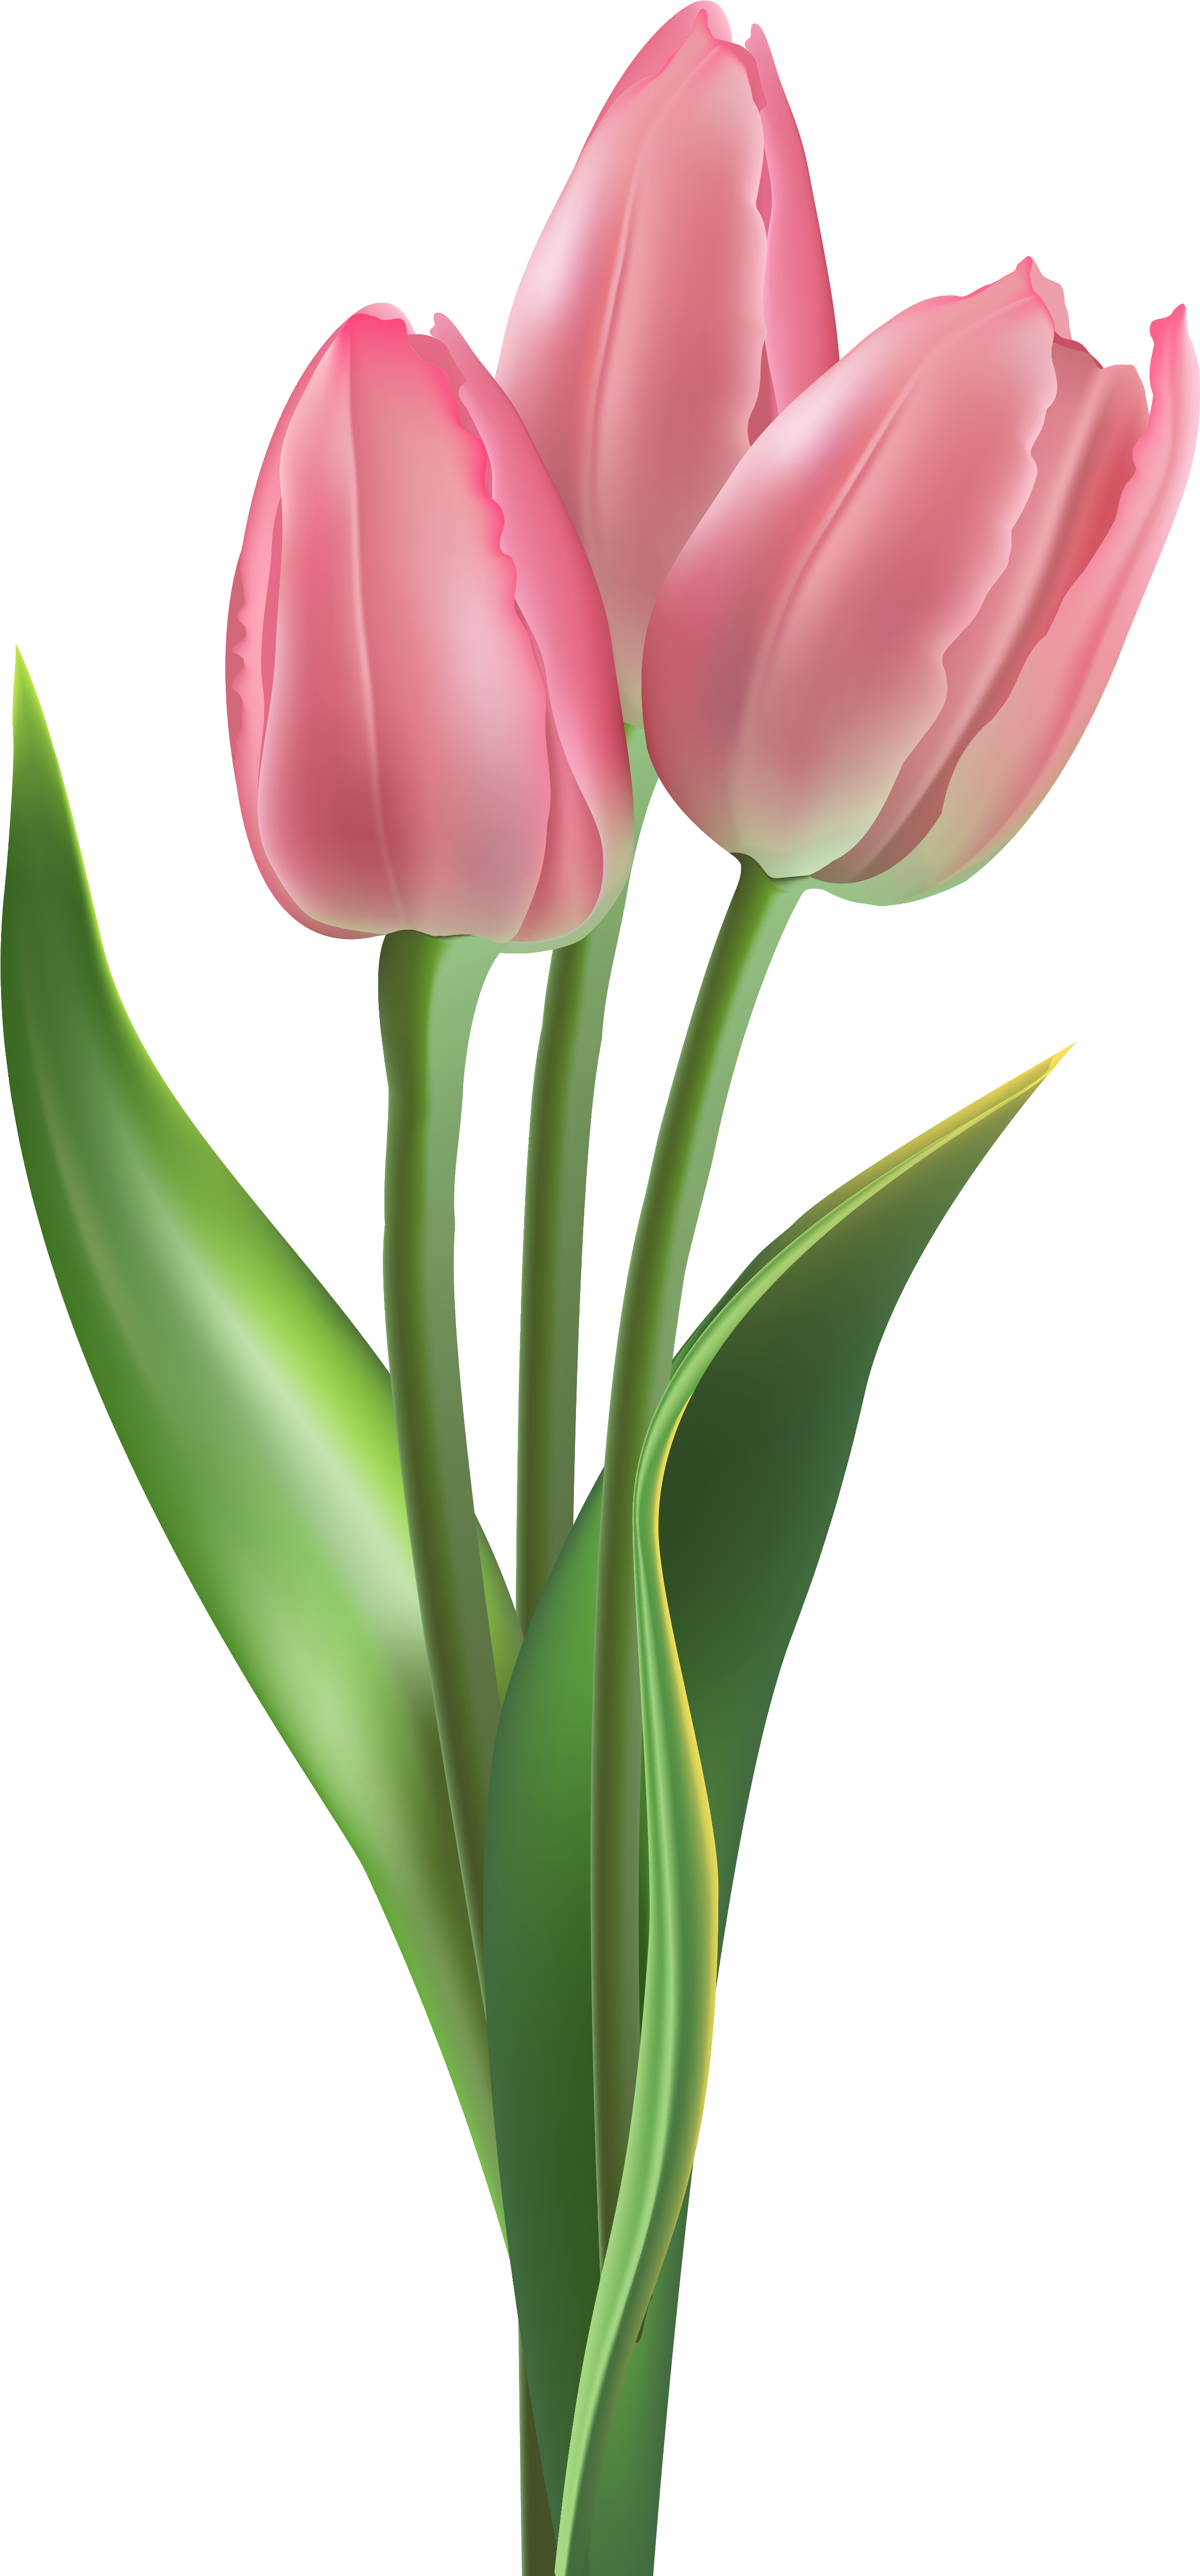 Soft Pink Tulips Png Clipart Image - Soft Pink Pink Tulips (2484x5102)